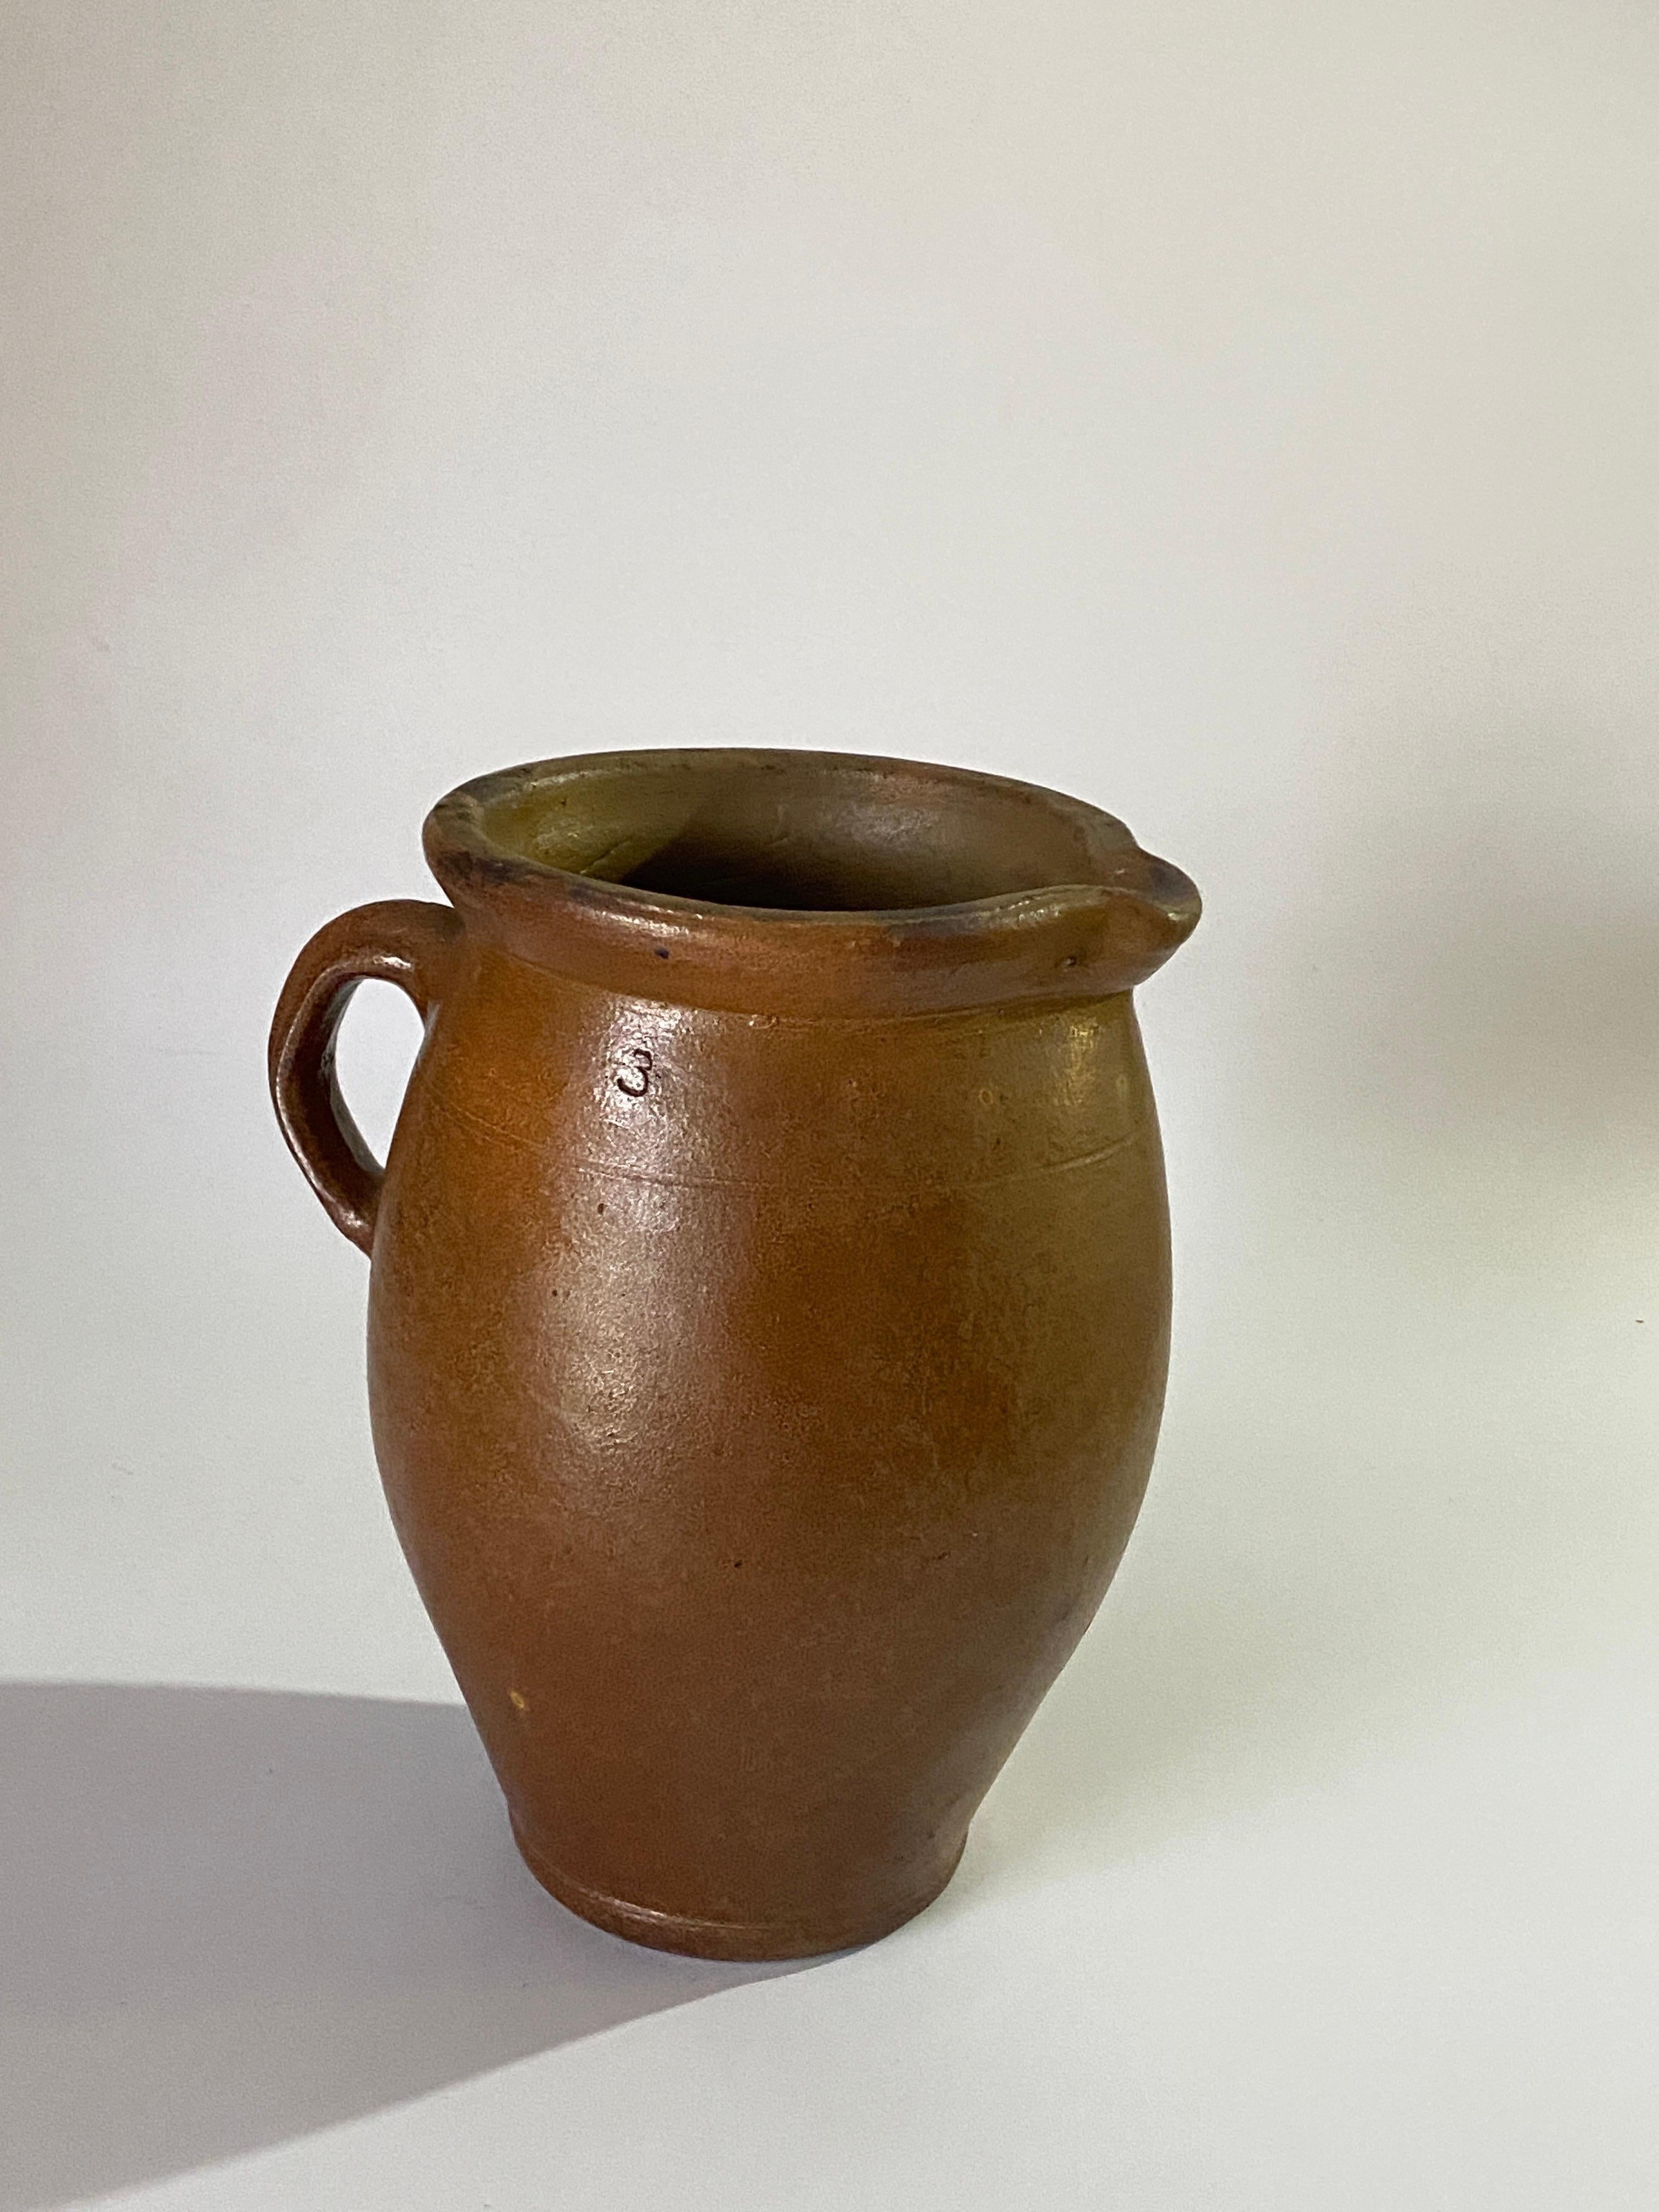 Jug or pitcher, with an exceptional patina. It's color with brown gives very pleasant contrasts. This Pitcher was created in France in the 1960s.